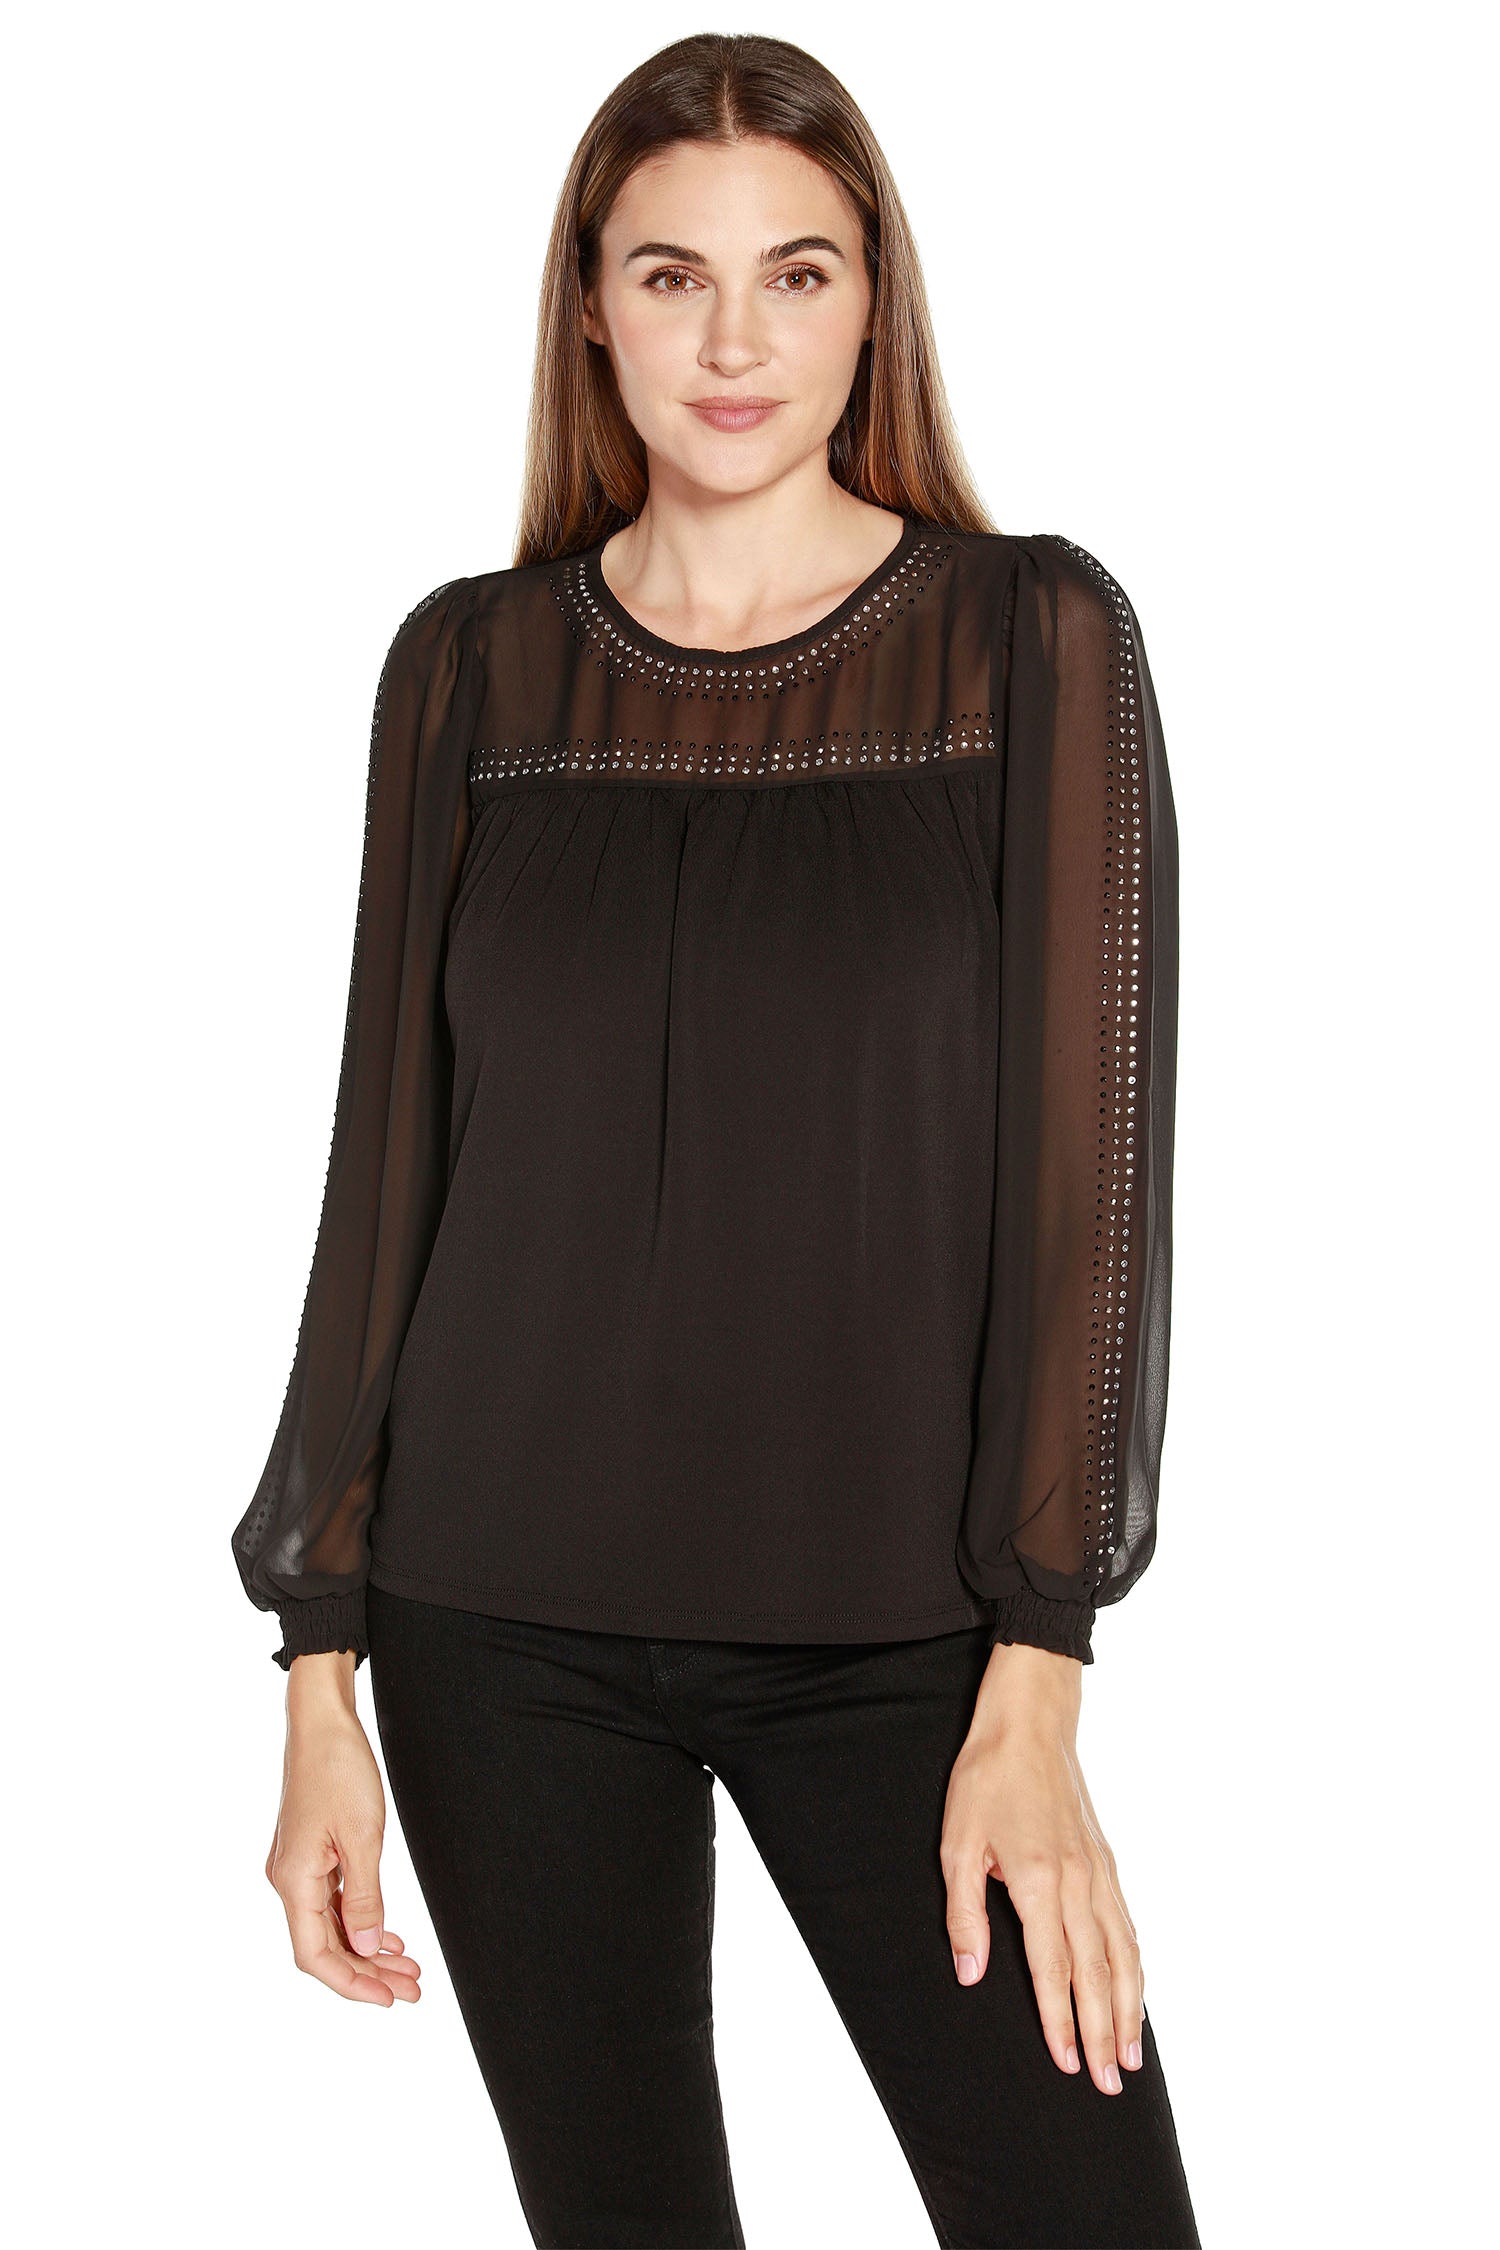 Women's Pullover Tunic with Sheer Yoke and Sleeves with Rhinestone Details